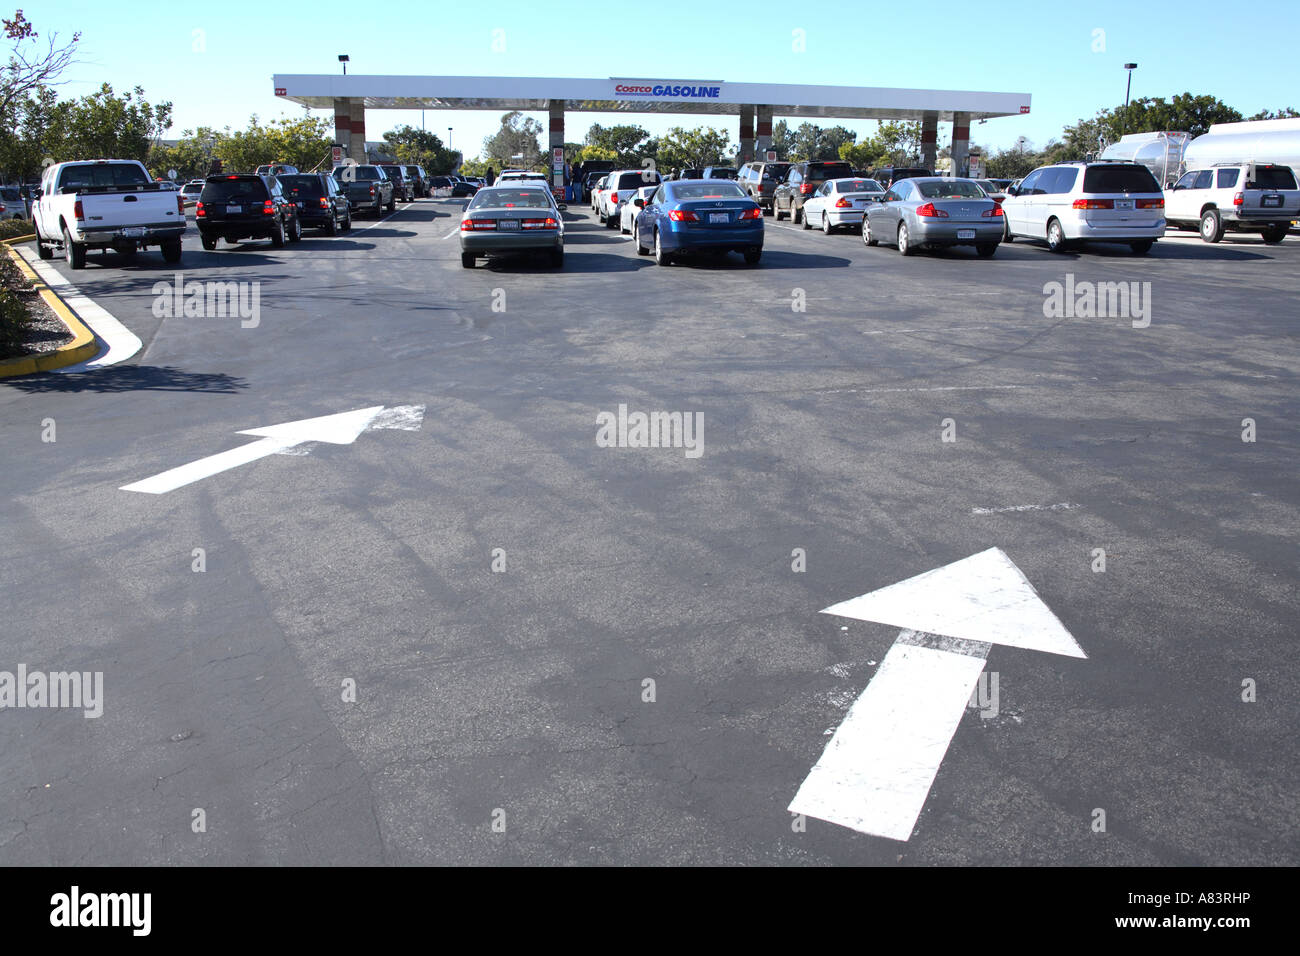 cars waiting in line for getting cheap fuel at costco gas pump 951 palomar airport rd, carlsbad, california, usa Stock Photo